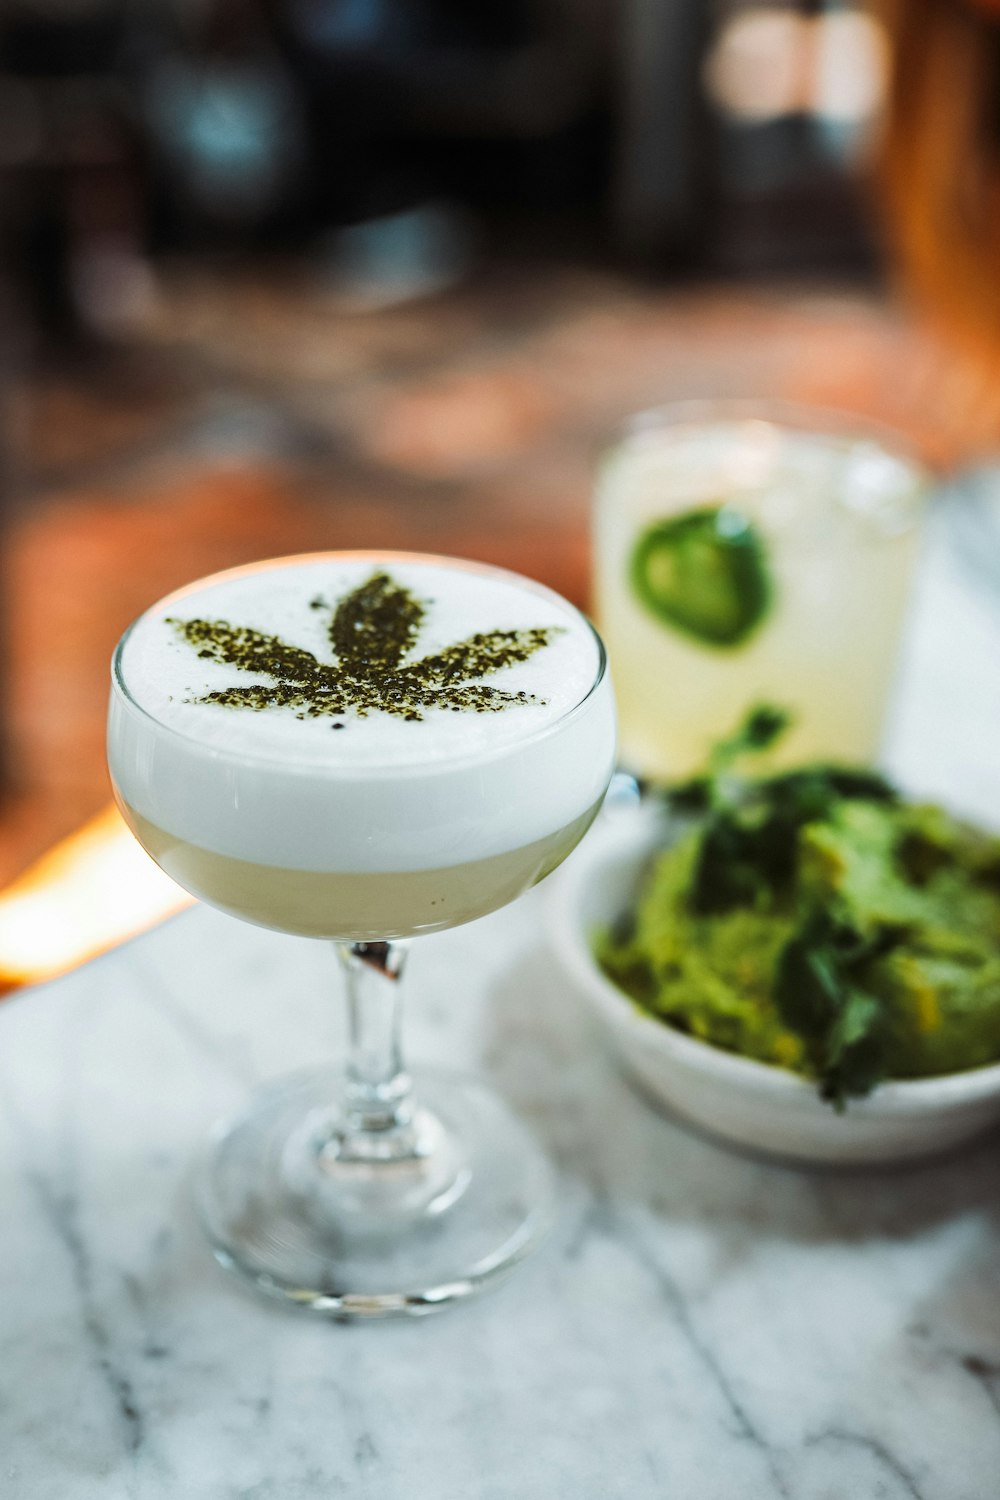 Handcrafted CBD cocktails at Gracias Madres in the heart of West Hollywood.